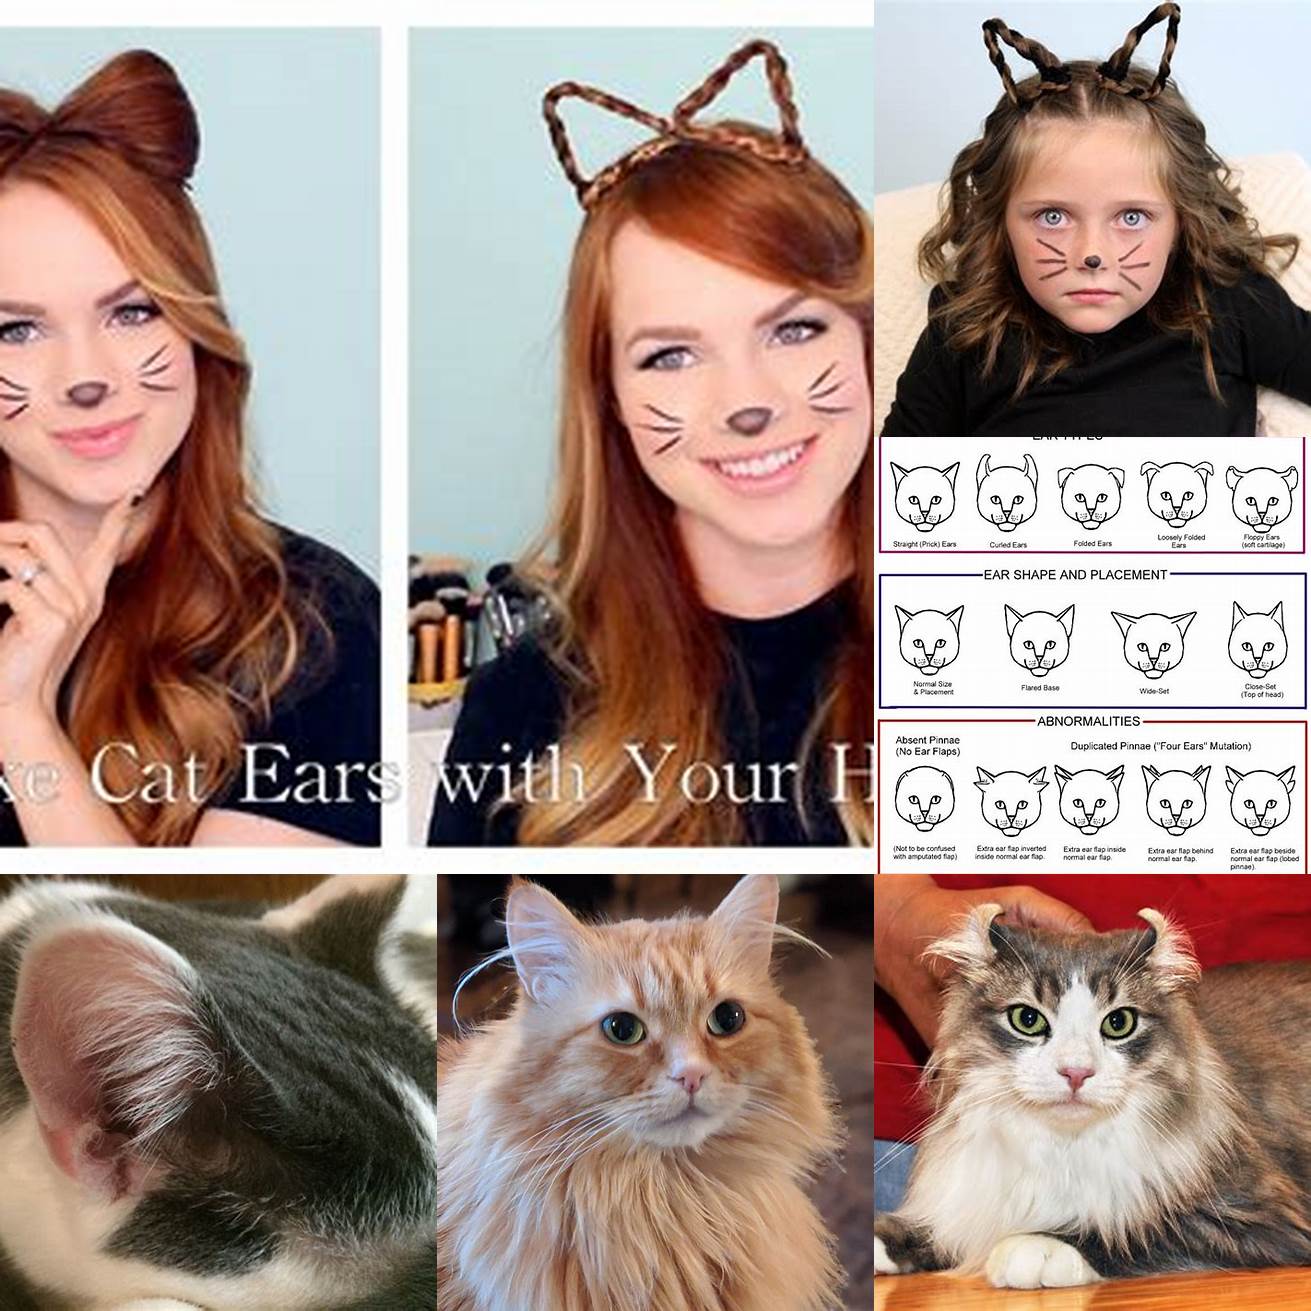 Cat ears with hair in different colors